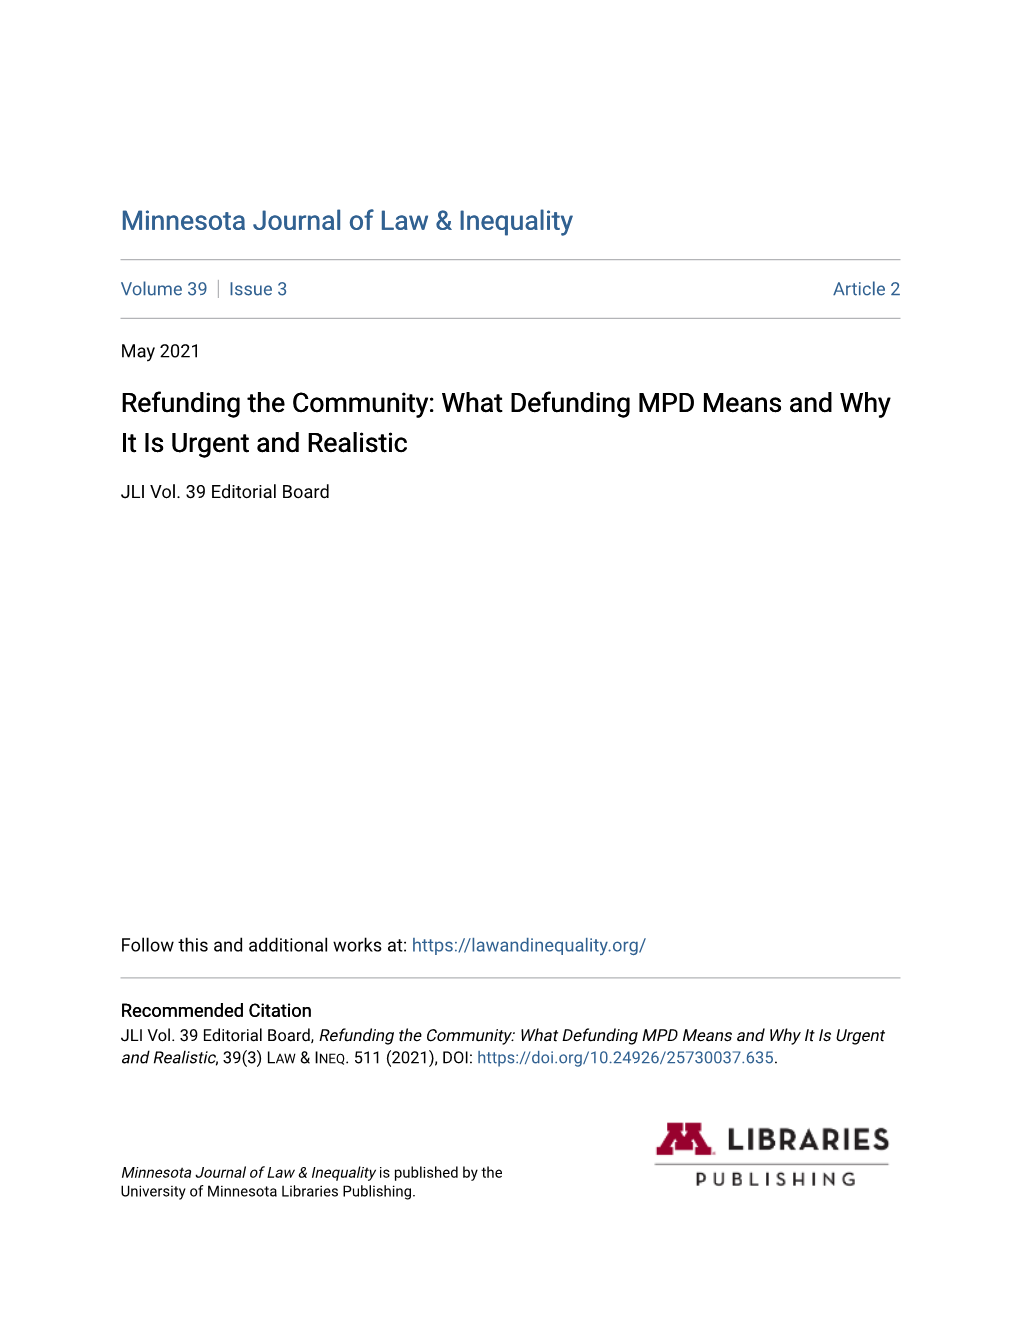 Refunding the Community: What Defunding MPD Means and Why It Is Urgent and Realistic